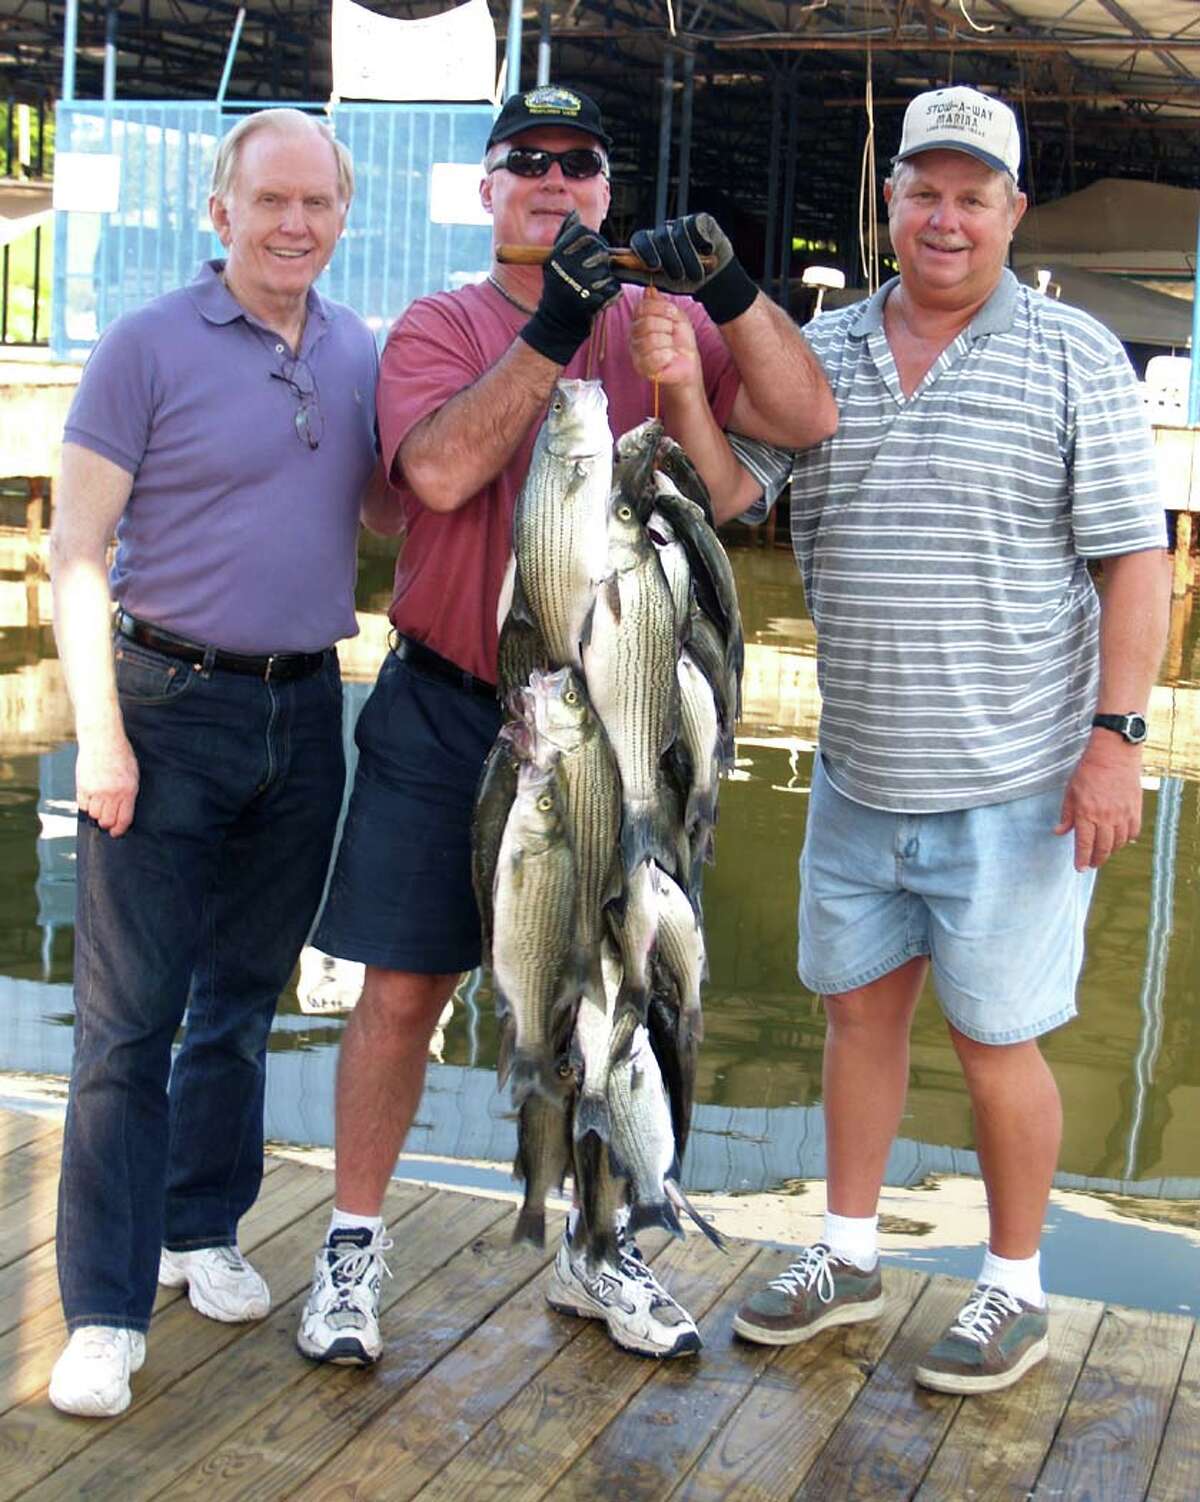 Fishing guides like Butch Terpe (right) can take you to the fish and show you how to catch them.